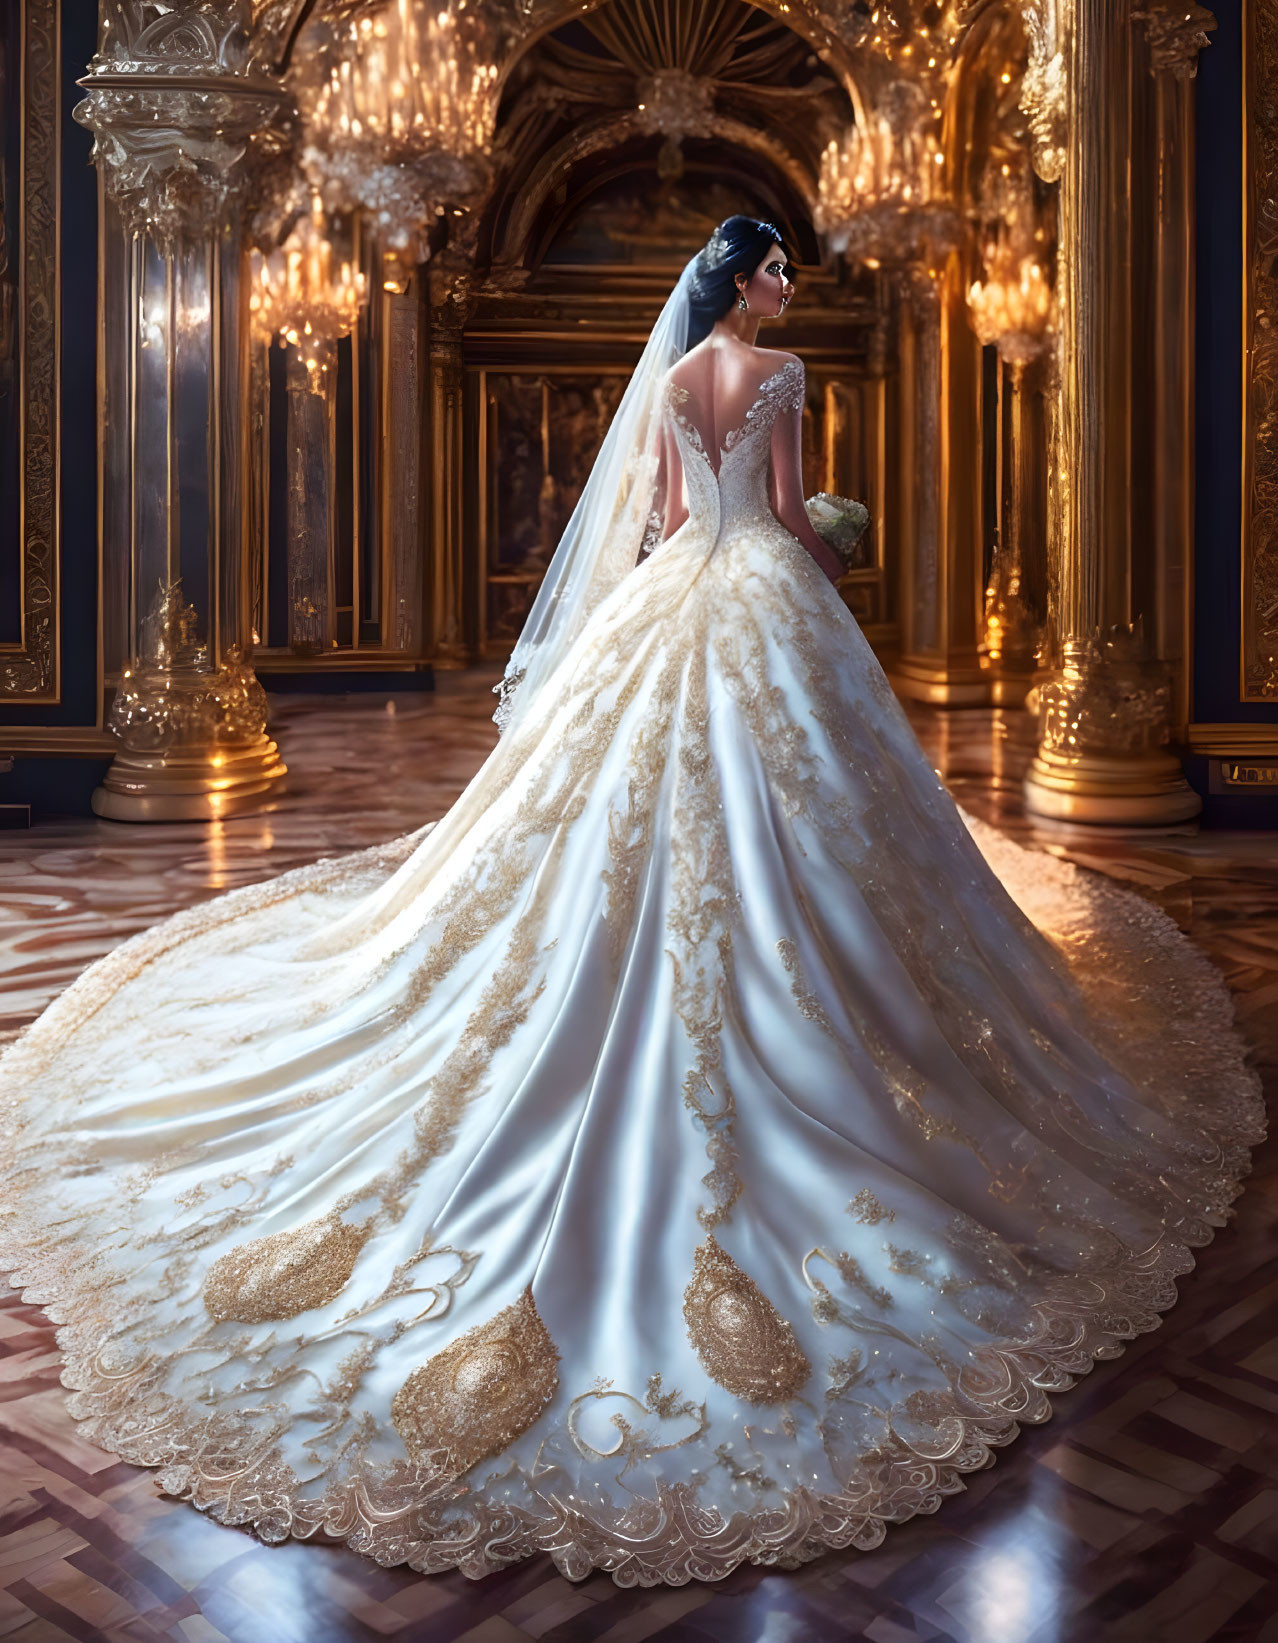 Bride in ornate gold-detailed gown in lavish chandeliered room